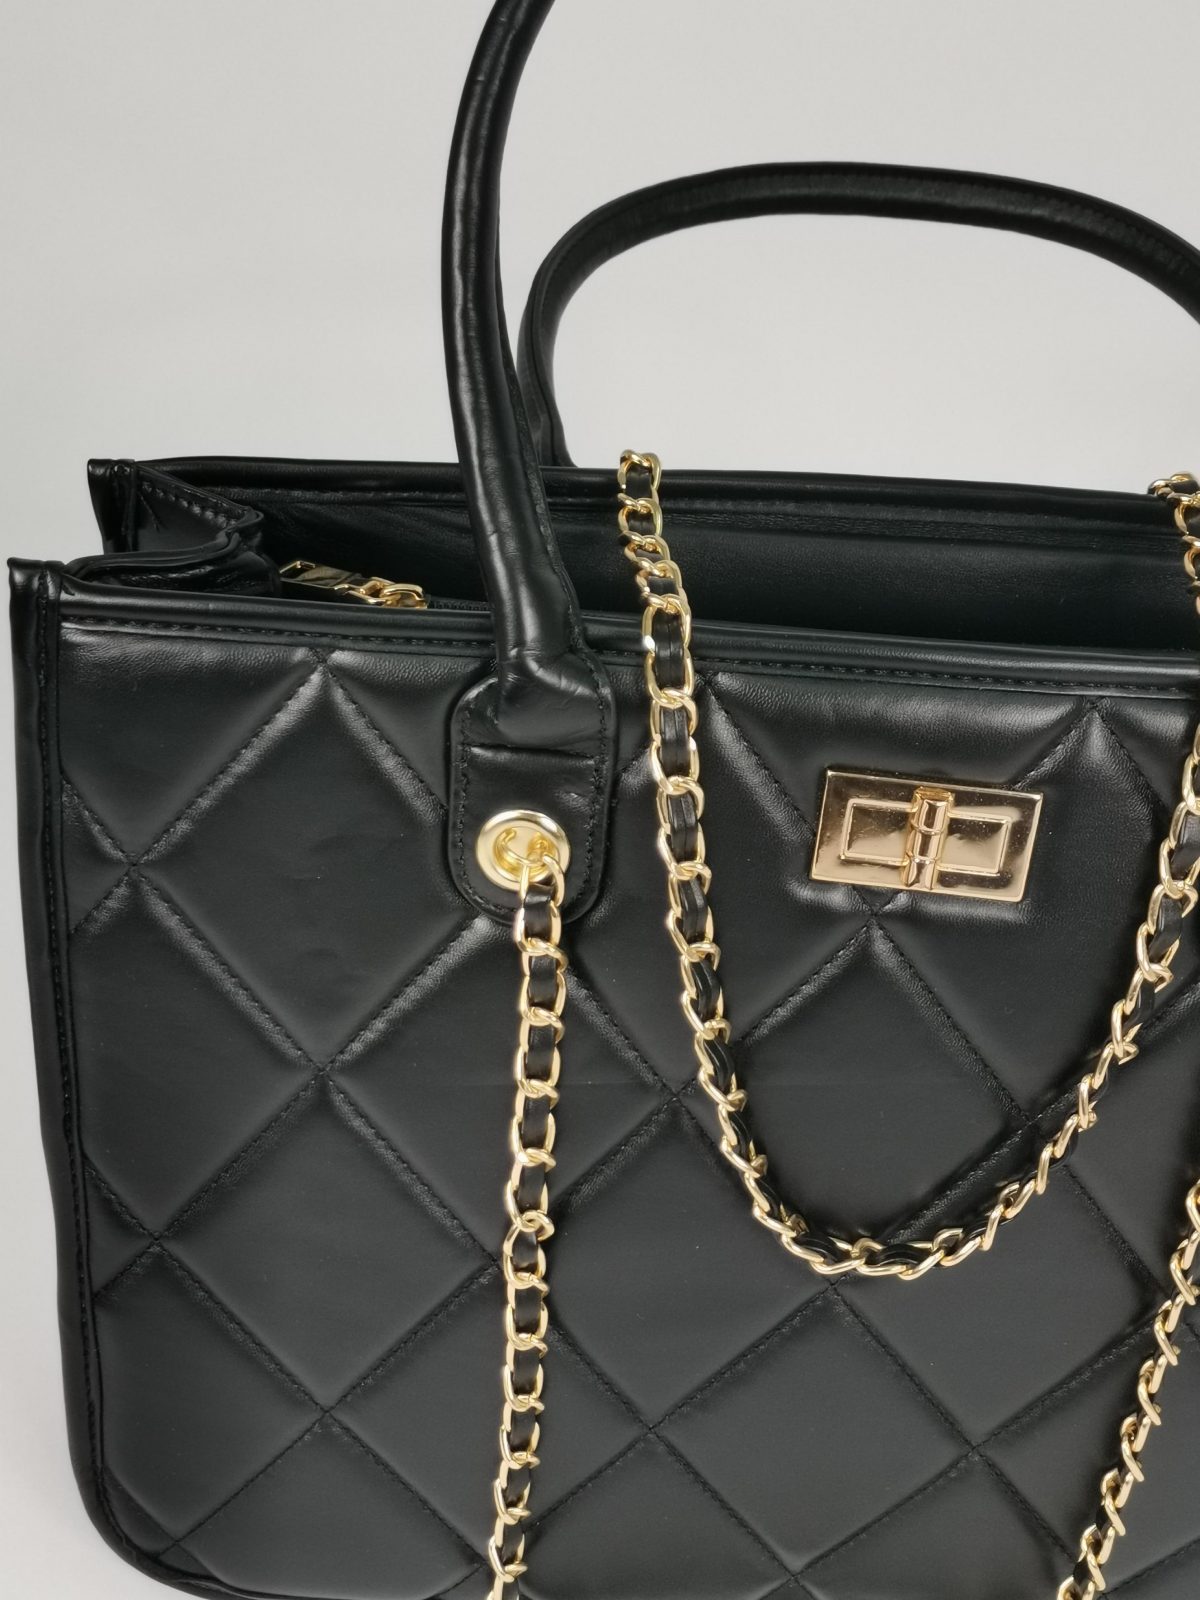 Large handbag in black with gold chain